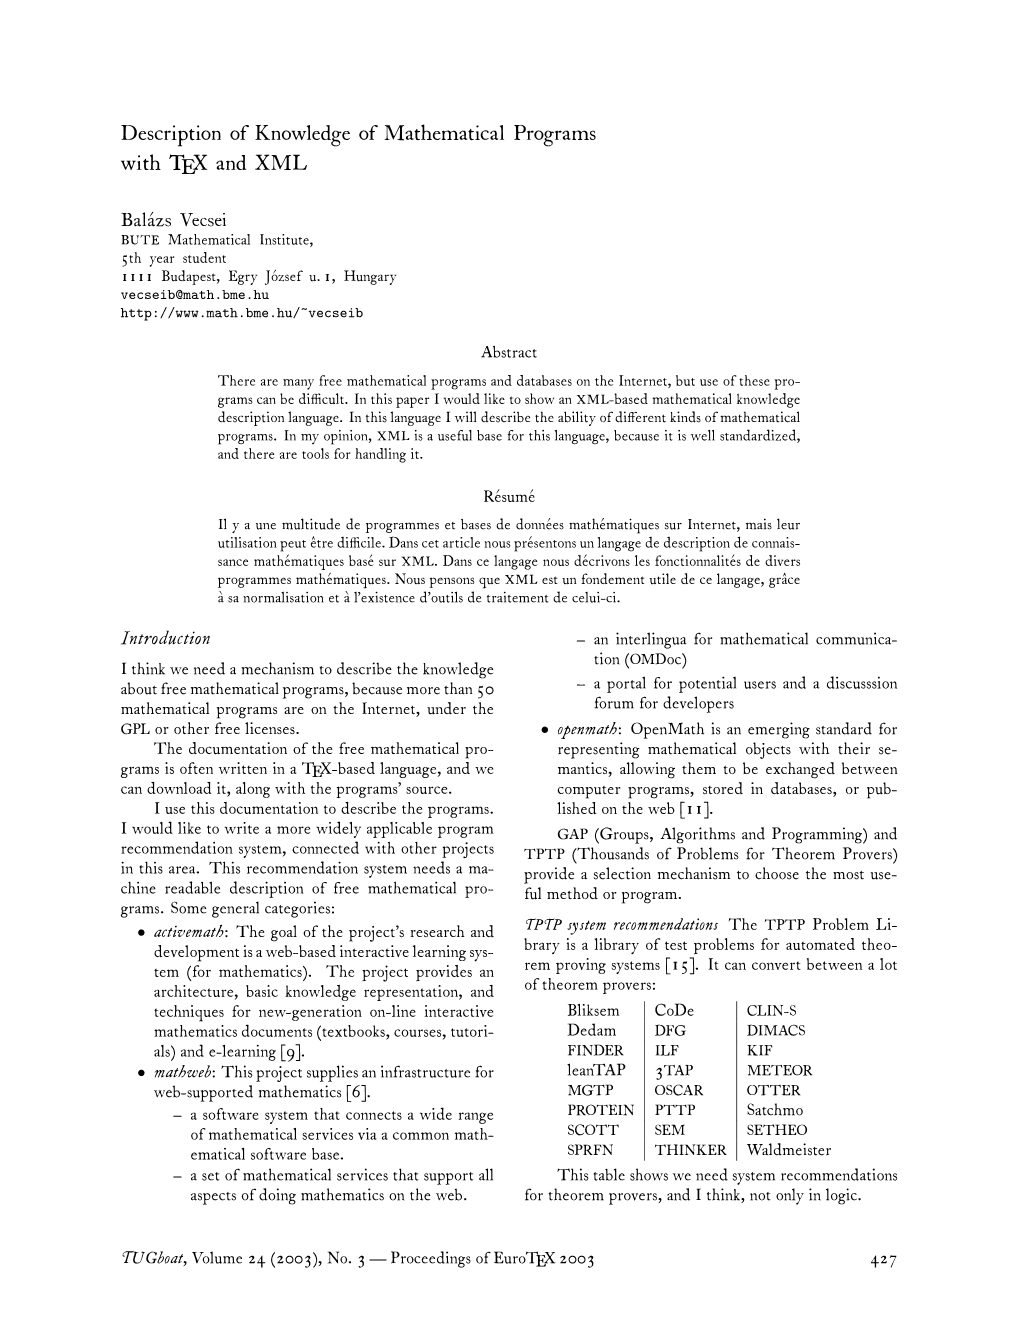 Description of Knowledge of Mathematical Programs with TEX and XML